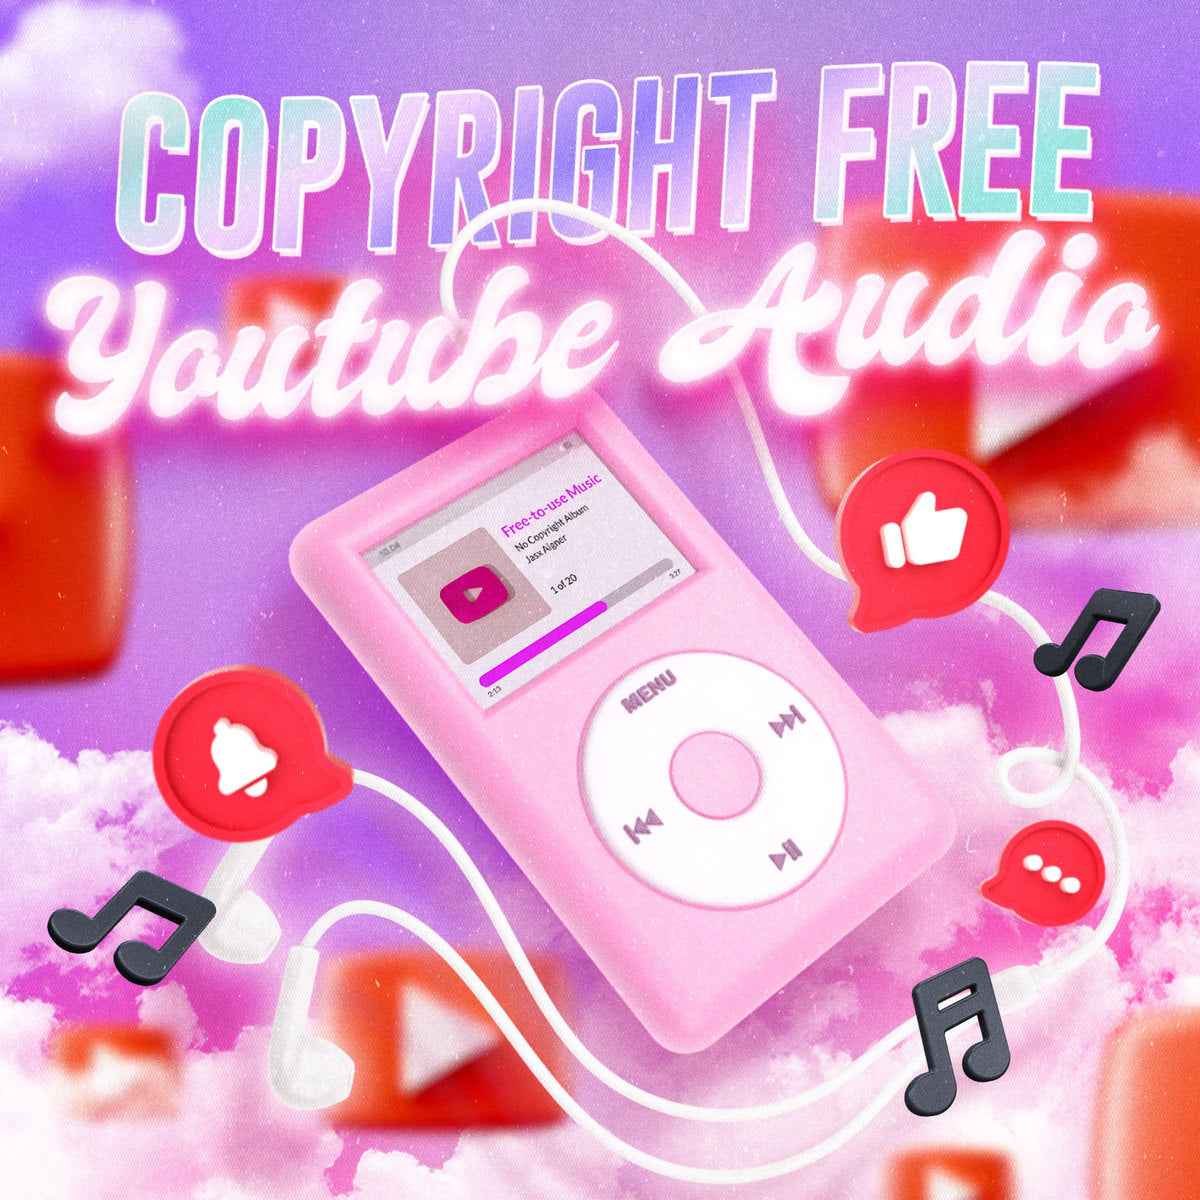 25 Copyright Free HipHop + RnB Songs For YouTube